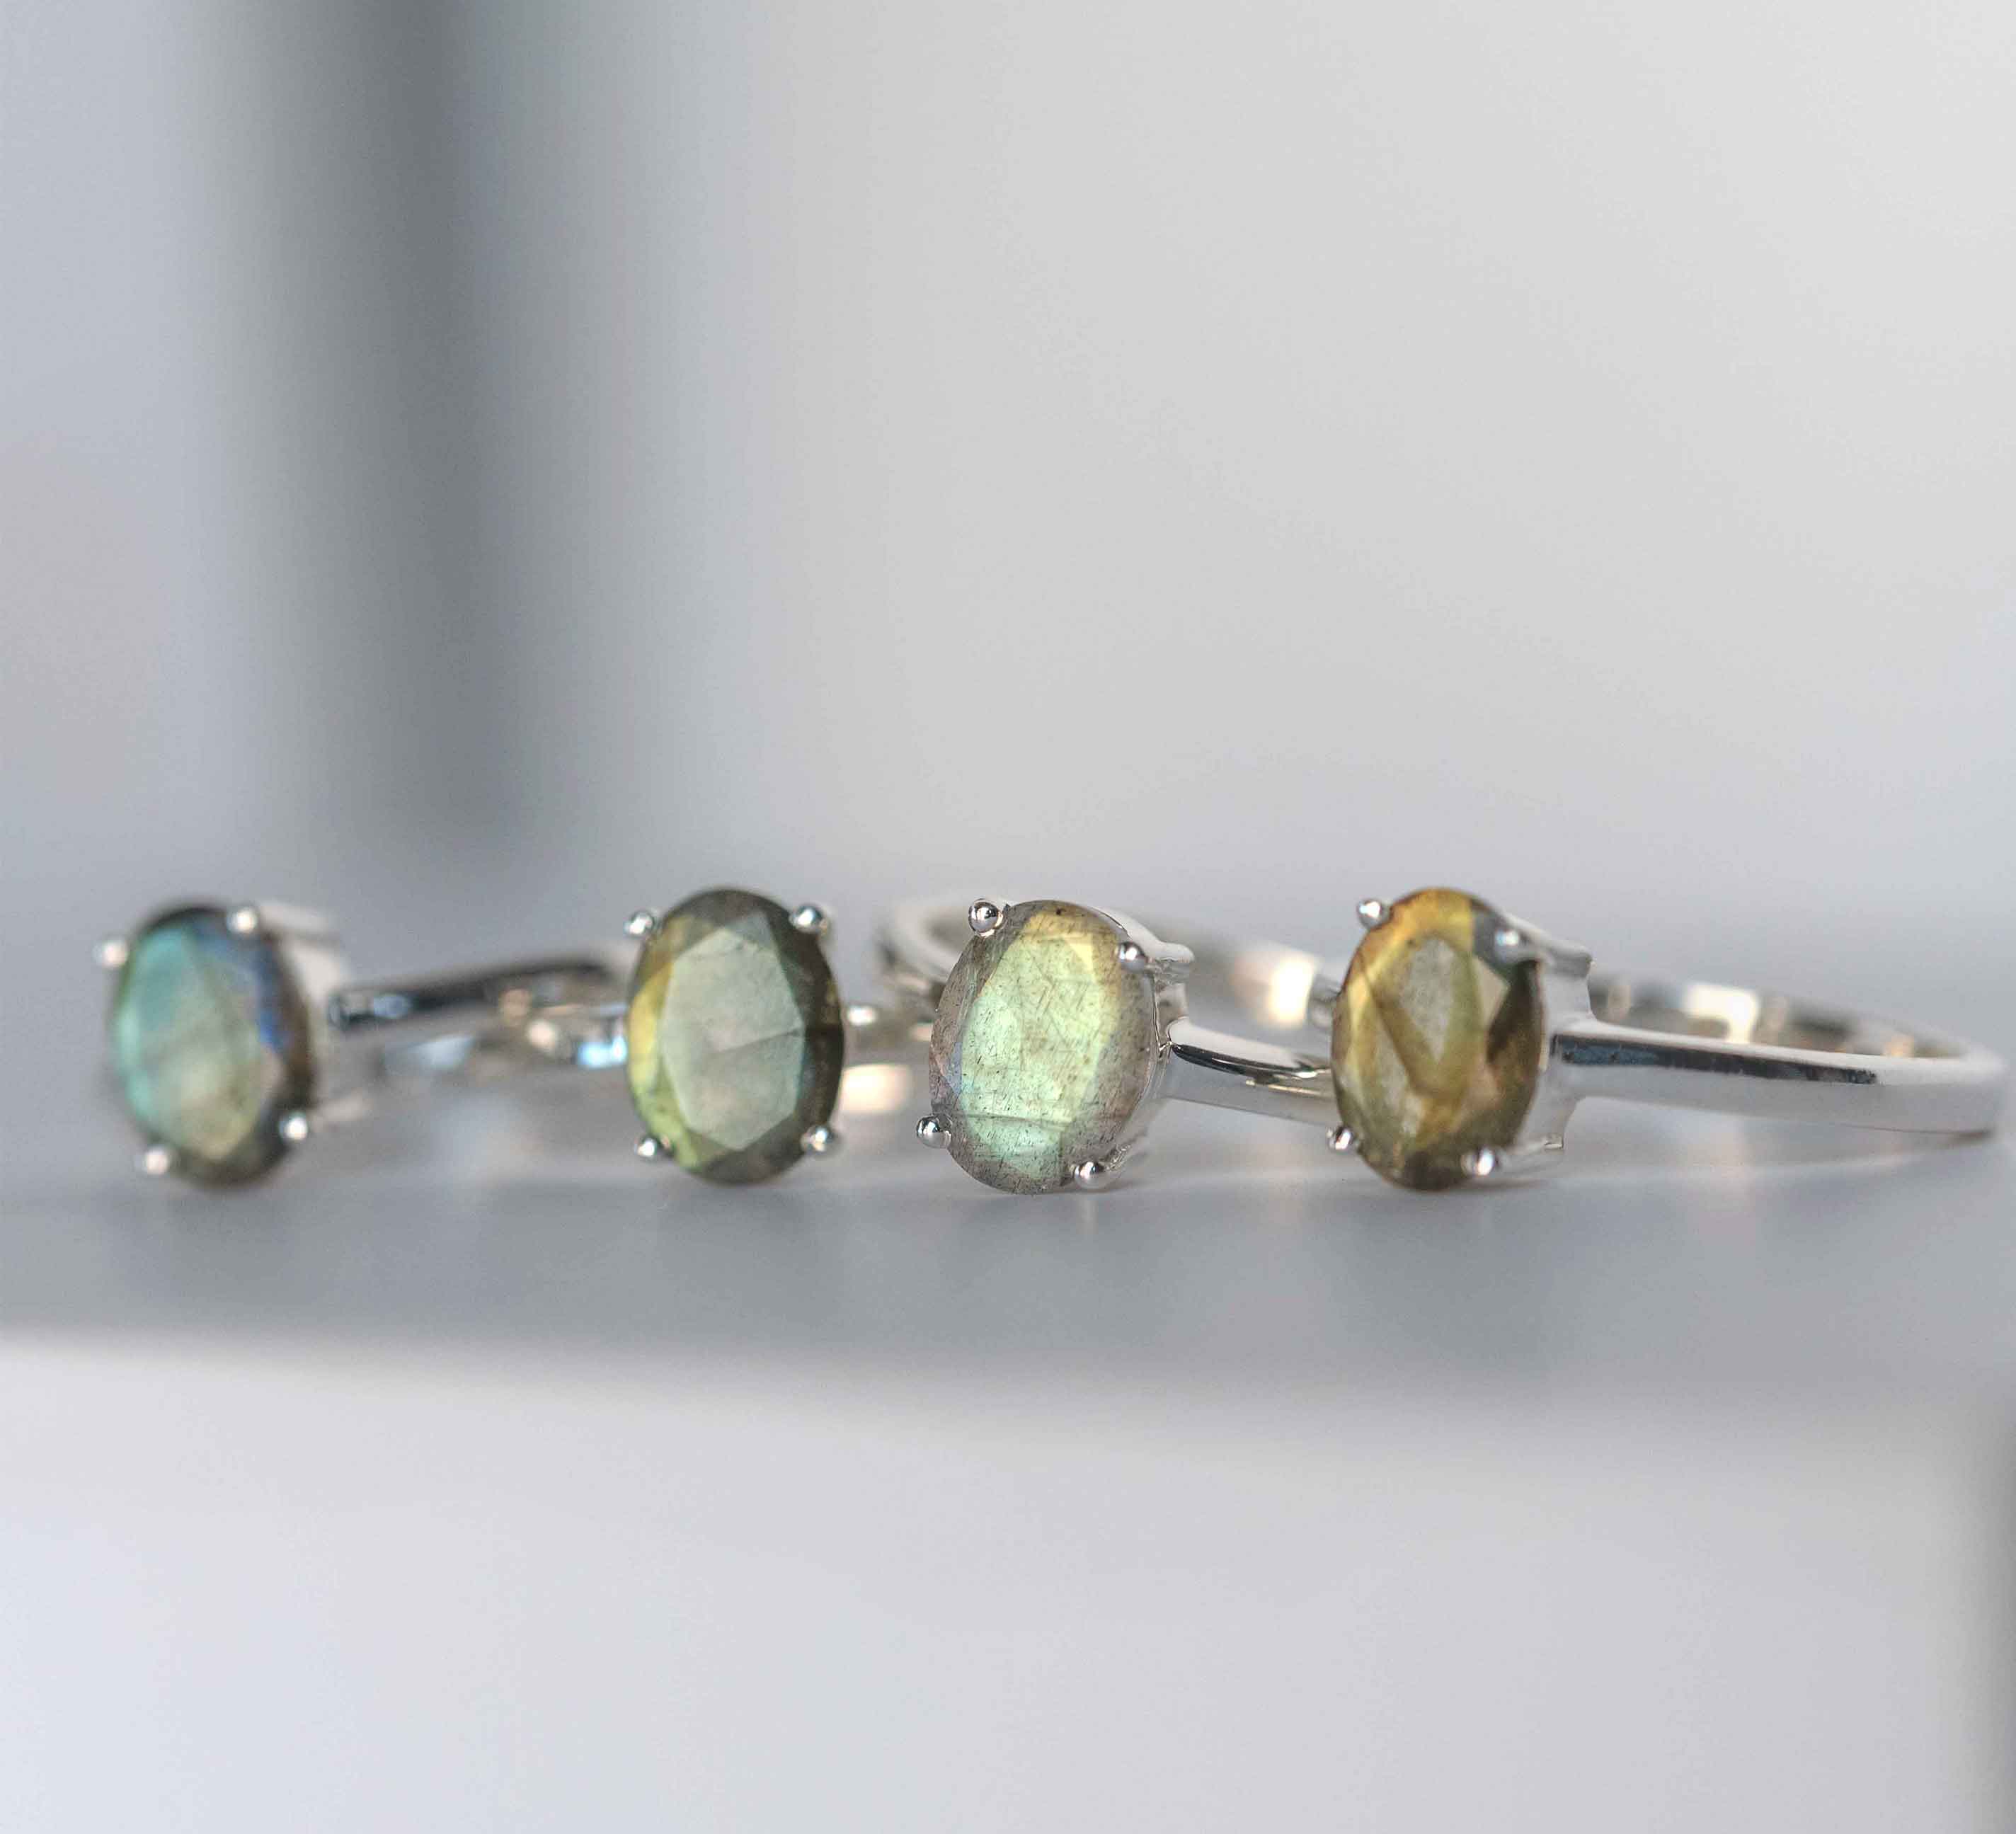 how to care for labradorite gemstone jewelry